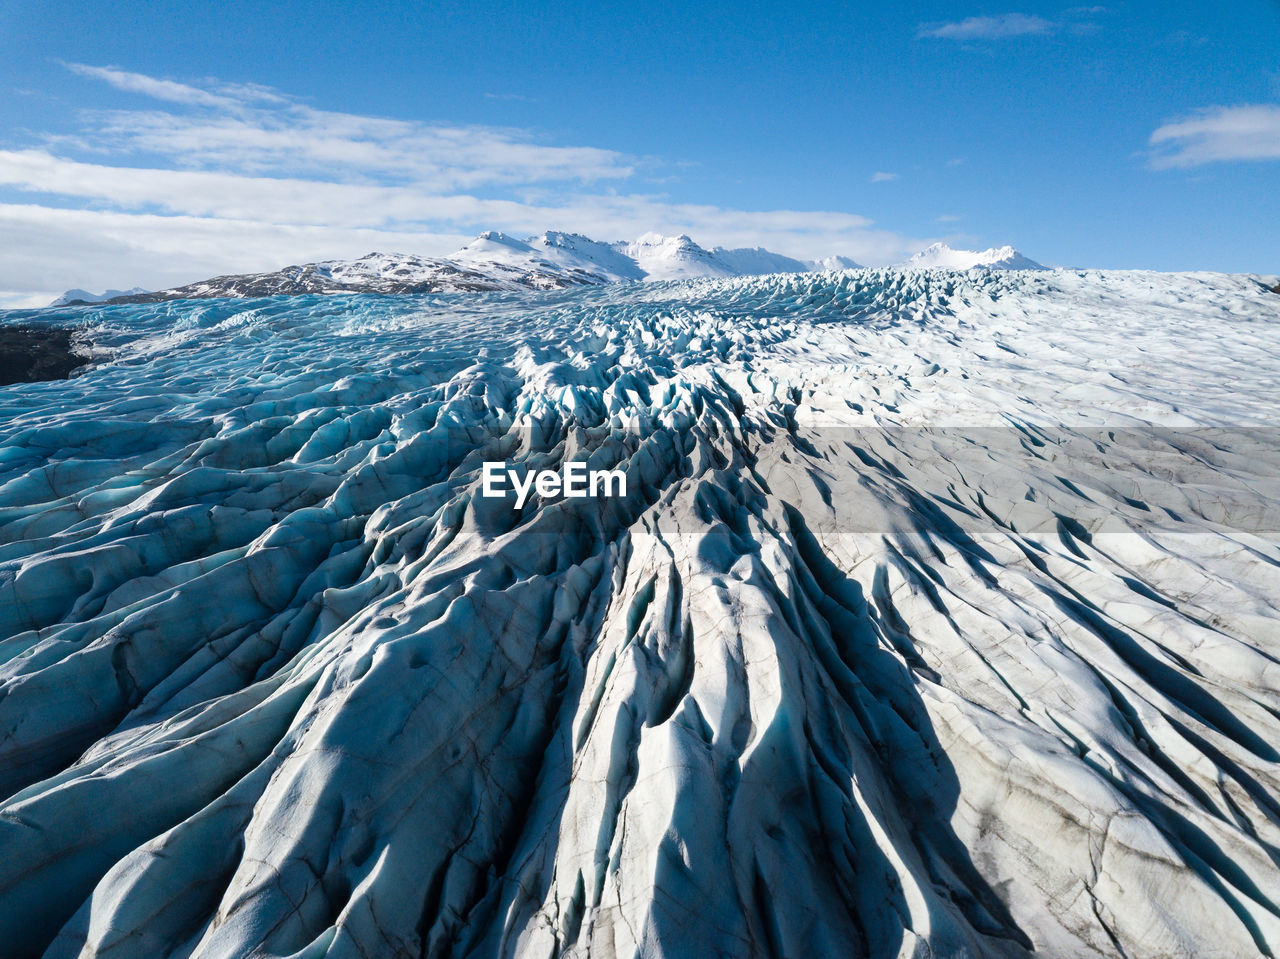 AERIAL VIEW OF SNOWCAPPED MOUNTAIN AGAINST BLUE SKY